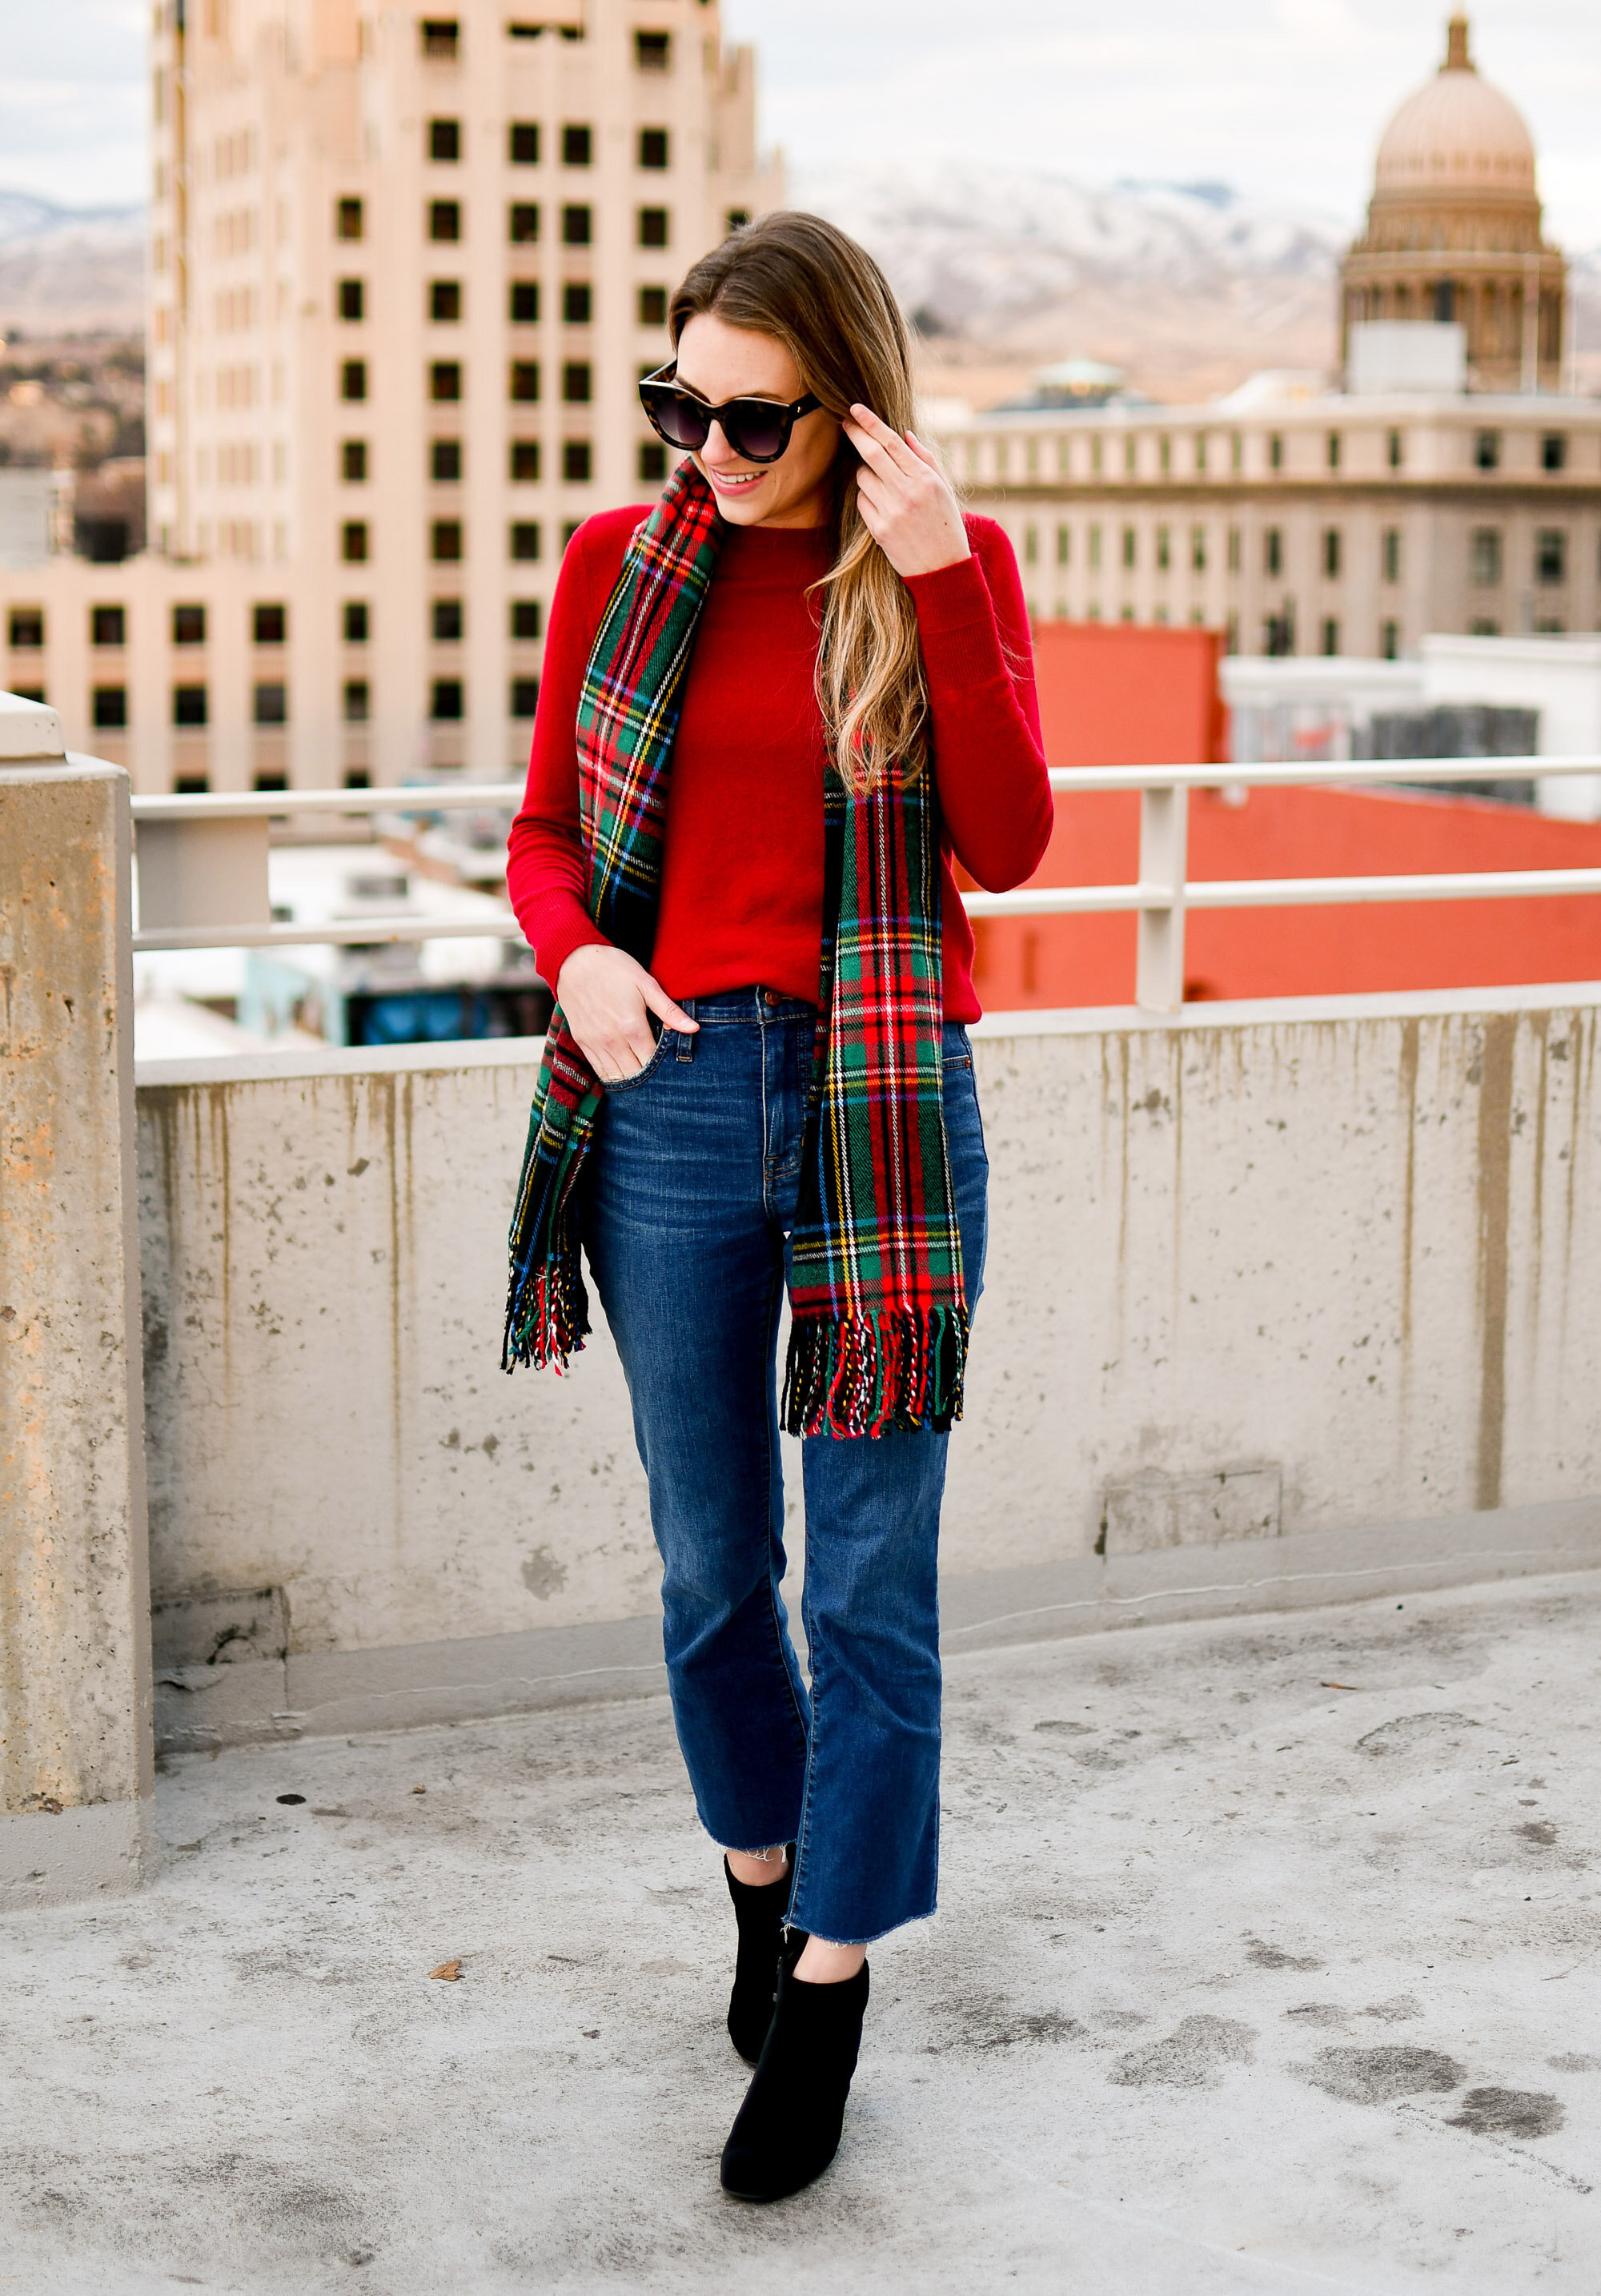 Favorite outfit: Dressed in holiday style — Cotton Cashmere Cat Hair